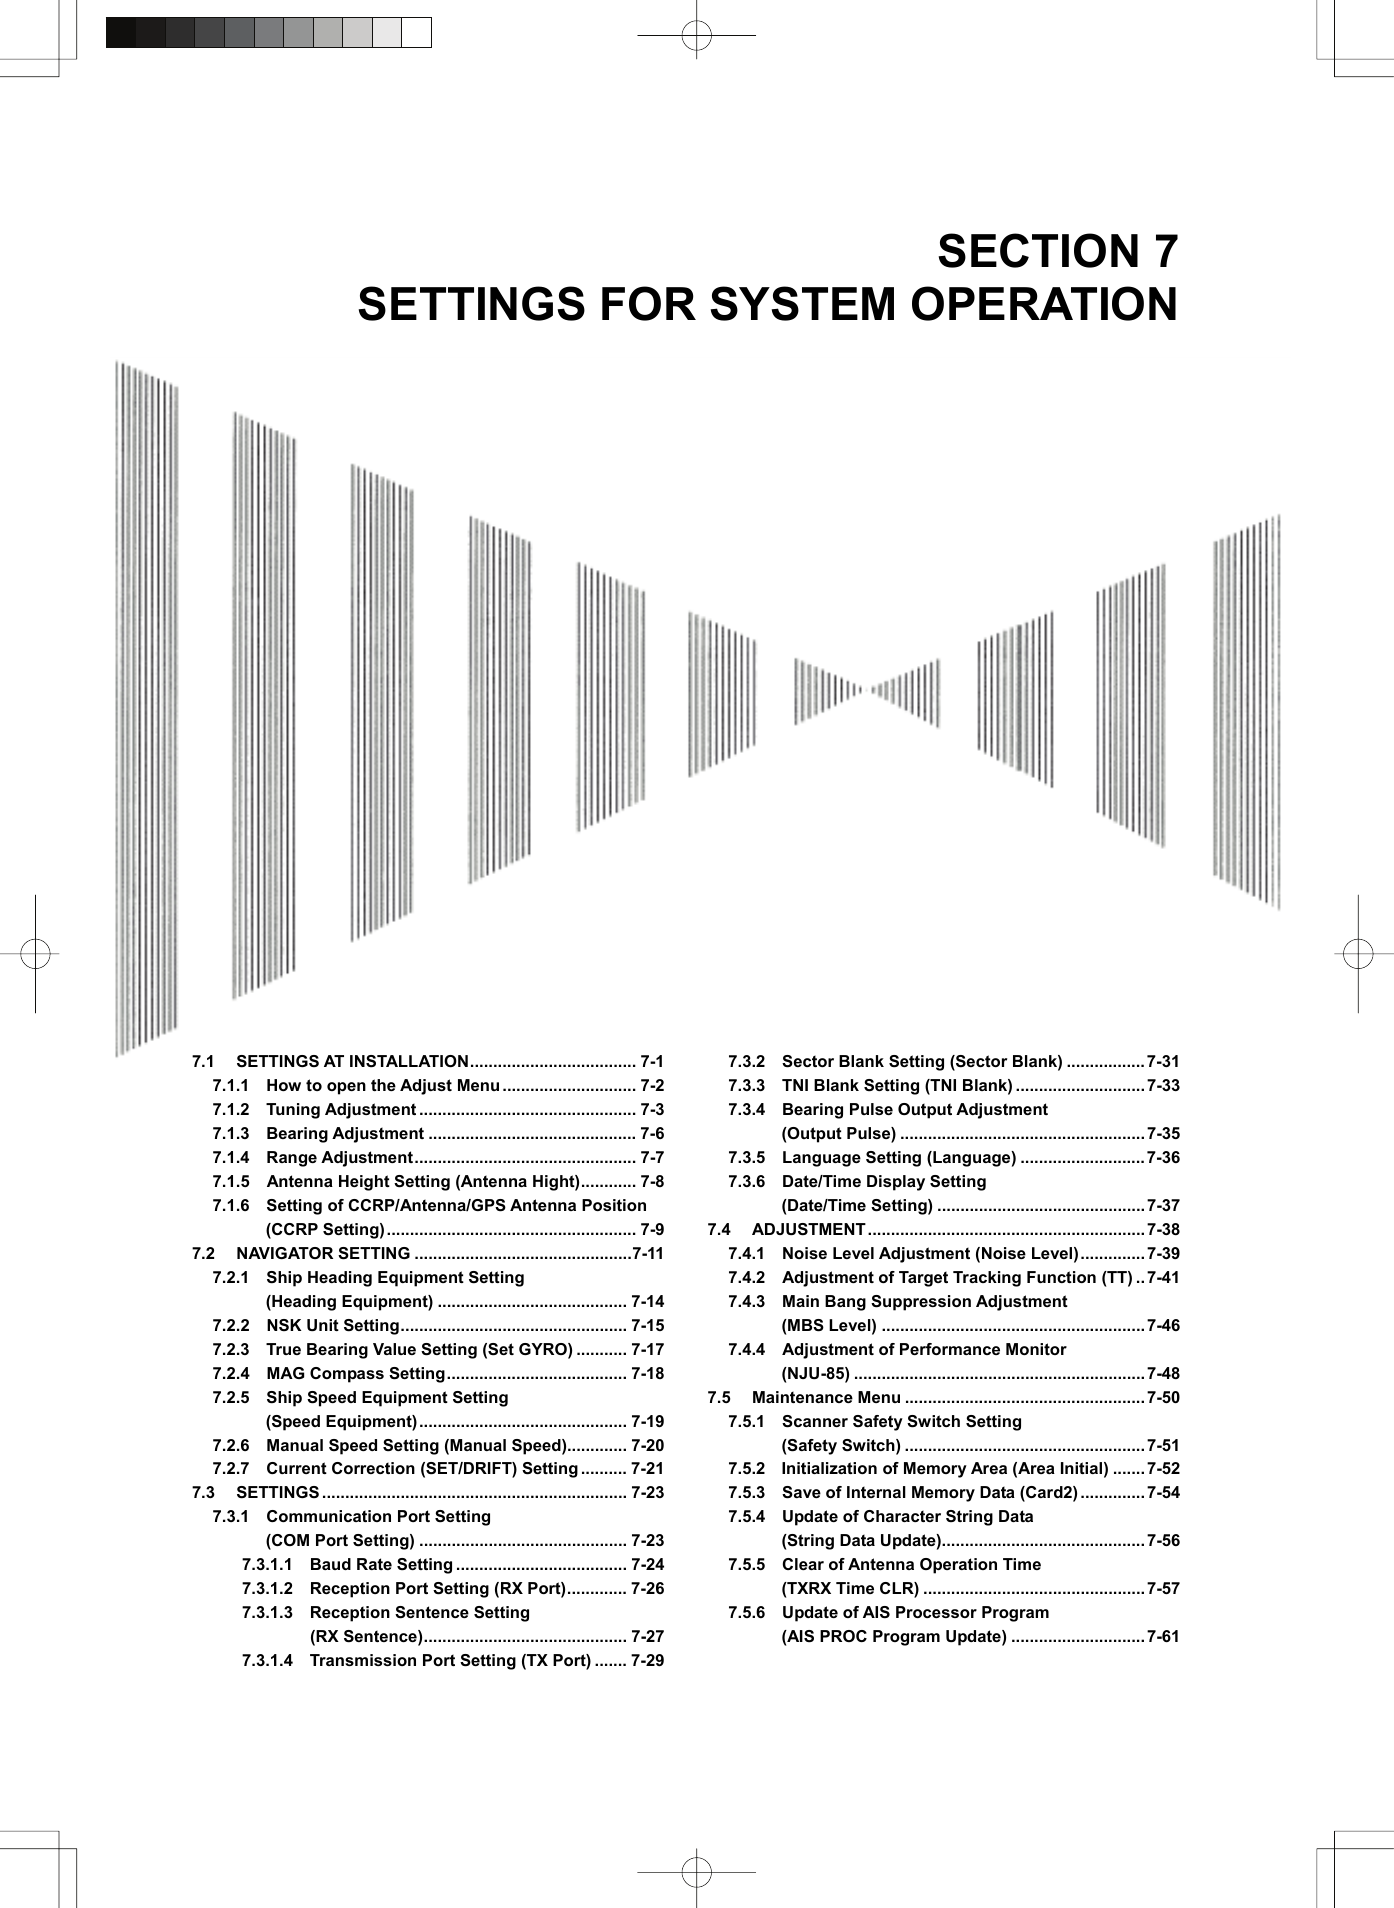  SECTION 7 SETTINGS FOR SYSTEM OPERATION                               7.1 SETTINGS AT INSTALLATION.................................... 7-1 7.1.1    How to open the Adjust Menu ............................. 7-2 7.1.2  Tuning Adjustment ............................................... 7-3 7.1.3  Bearing Adjustment ............................................. 7-6 7.1.4  Range Adjustment................................................ 7-7 7.1.5    Antenna Height Setting (Antenna Hight)............ 7-8 7.1.6  Setting of CCRP/Antenna/GPS Antenna Position (CCRP Setting)...................................................... 7-9 7.2 NAVIGATOR SETTING ...............................................7-11 7.2.1  Ship Heading Equipment Setting  (Heading Equipment) ......................................... 7-14 7.2.2  NSK Unit Setting................................................. 7-15 7.2.3    True Bearing Value Setting (Set GYRO) ........... 7-17 7.2.4  MAG Compass Setting....................................... 7-18 7.2.5    Ship Speed Equipment Setting   (Speed Equipment)............................................. 7-19 7.2.6    Manual Speed Setting (Manual Speed)............. 7-20 7.2.7  Current Correction (SET/DRIFT) Setting .......... 7-21 7.3 SETTINGS .................................................................. 7-23 7.3.1  Communication Port Setting  (COM Port Setting) ............................................. 7-23 7.3.1.1  Baud Rate Setting ..................................... 7-24 7.3.1.2    Reception Port Setting (RX Port)............. 7-26 7.3.1.3  Reception Sentence Setting  (RX Sentence)............................................ 7-27 7.3.1.4    Transmission Port Setting (TX Port) ....... 7-29 7.3.2    Sector Blank Setting (Sector Blank) .................7-31 7.3.3    TNI Blank Setting (TNI Blank) ............................7-33 7.3.4  Bearing Pulse Output Adjustment  (Output Pulse) .....................................................7-35 7.3.5  Language Setting (Language) ...........................7-36 7.3.6  Date/Time Display Setting  (Date/Time Setting) .............................................7-37 7.4 ADJUSTMENT............................................................7-38 7.4.1  Noise Level Adjustment (Noise Level)..............7-39 7.4.2    Adjustment of Target Tracking Function (TT) ..7-41 7.4.3  Main Bang Suppression Adjustment  (MBS Level) ......................................................... 7-46 7.4.4    Adjustment of Performance Monitor   (NJU-85) ...............................................................7-48 7.5 Maintenance Menu ....................................................7-50 7.5.1  Scanner Safety Switch Setting  (Safety Switch) ....................................................7-51 7.5.2  Initialization of Memory Area (Area Initial) .......7-52 7.5.3    Save of Internal Memory Data (Card2) .............. 7-54 7.5.4    Update of Character String Data   (String Data Update)............................................7-56 7.5.5  Clear of Antenna Operation Time  (TXRX Time CLR) ................................................7-57 7.5.6    Update of AIS Processor Program   (AIS PROC Program Update) .............................7-61  